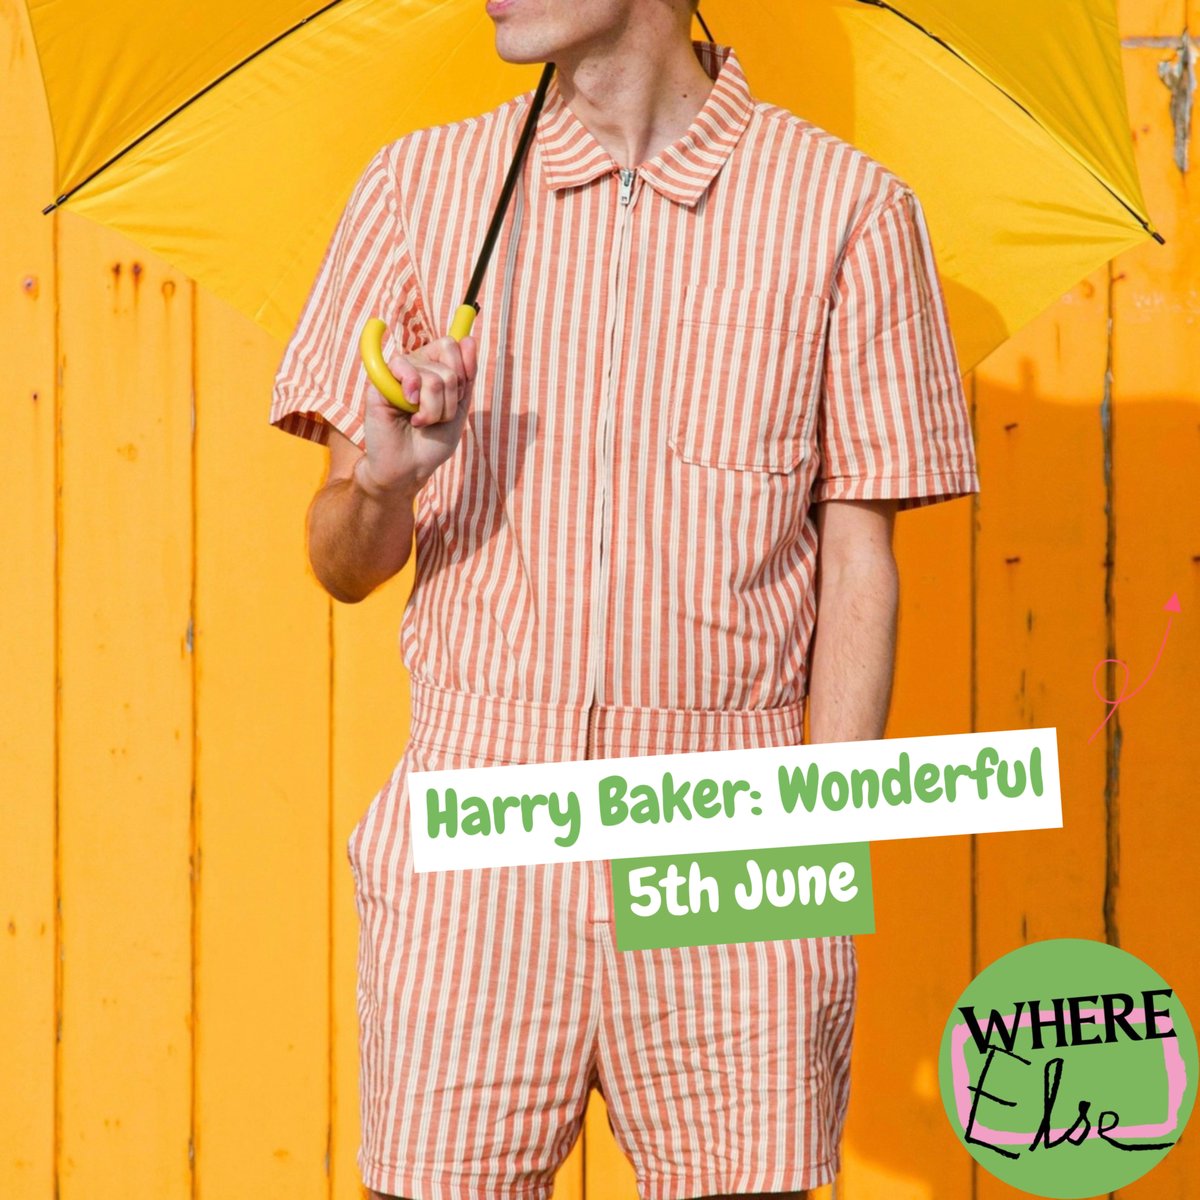 Get ready for a night of wonder with @harrybakerpoet ! Join us on Wednesday, June 5th, at Where Else? for an unforgettable performance filled with brand new poems, laughter, and poignant reflections. dice.fm/event/akn57-ha… #margate #thanet #kent #comedy #comedyshow #poet #events